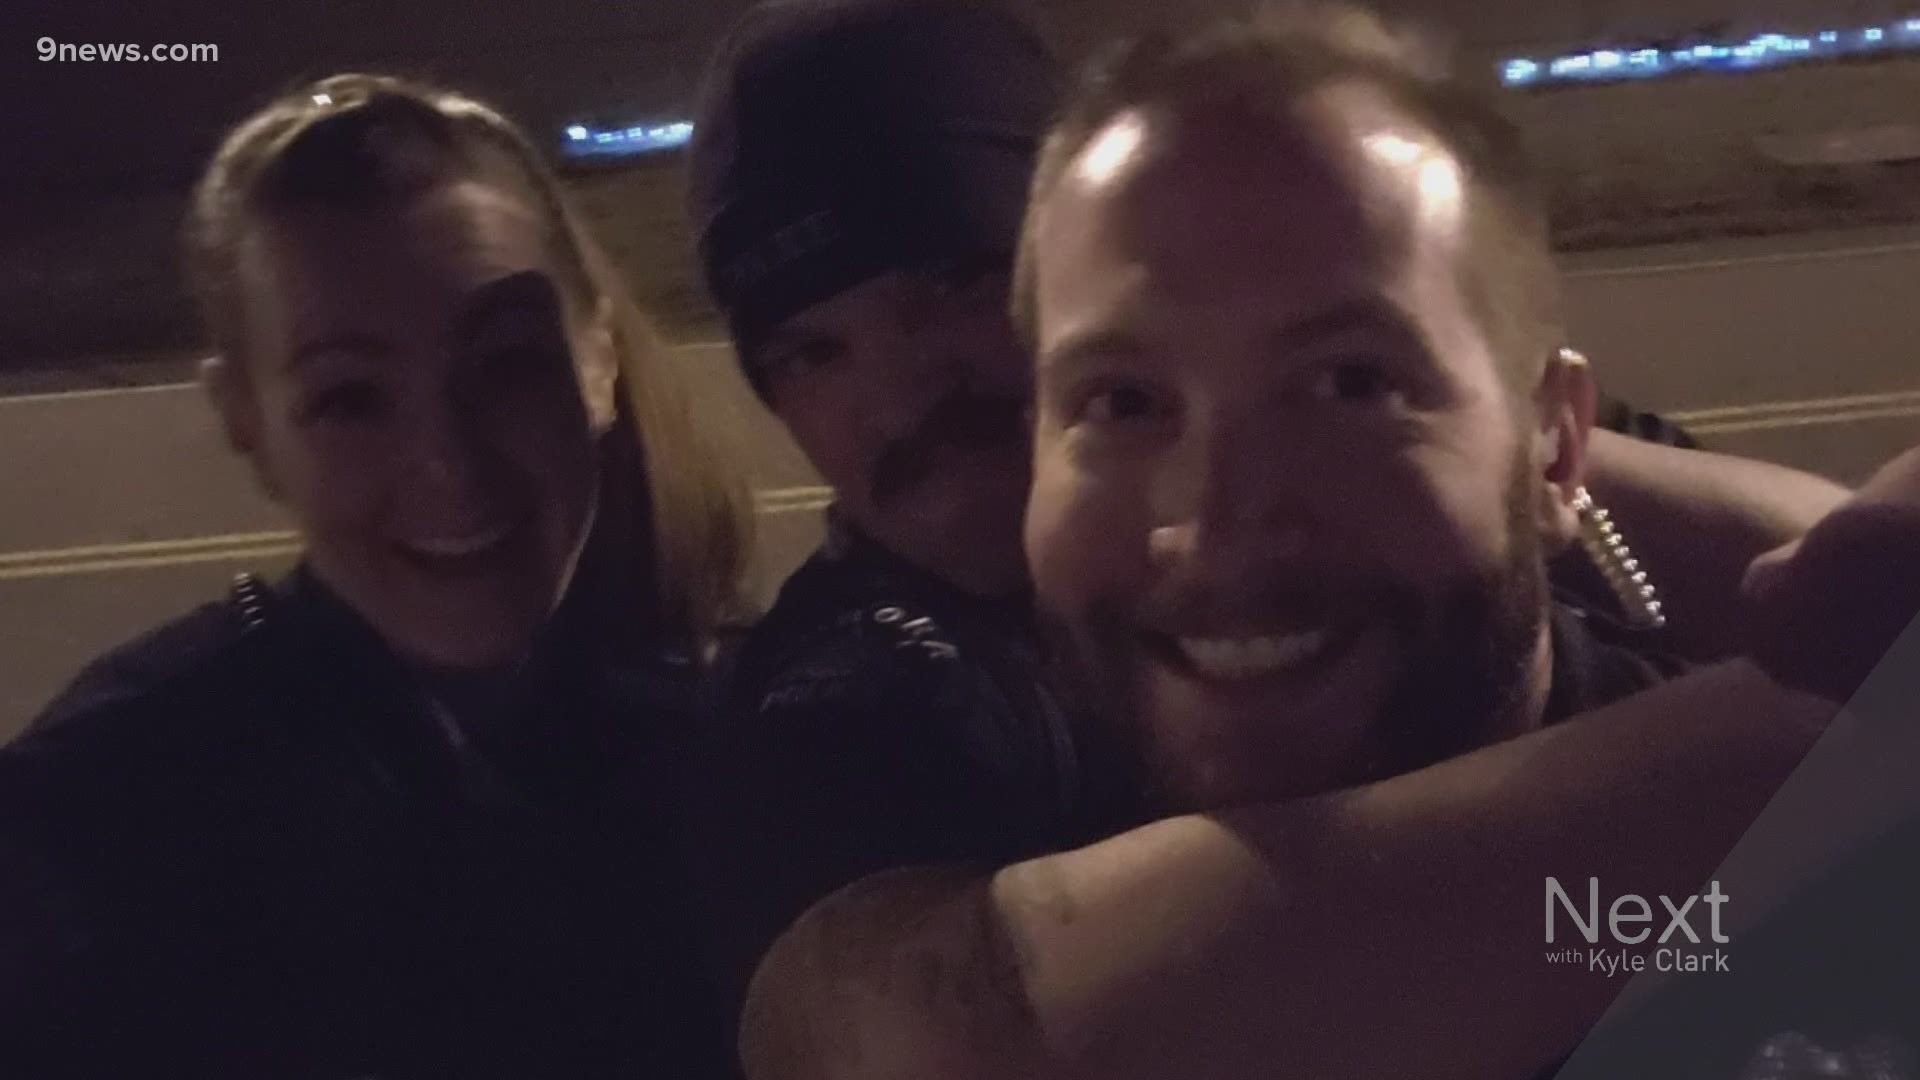 Three Aurora Police officers have been fired and one resigned for their part in a photo scandal. Pictures show officers mocking a choke hold near a McClain memorial.